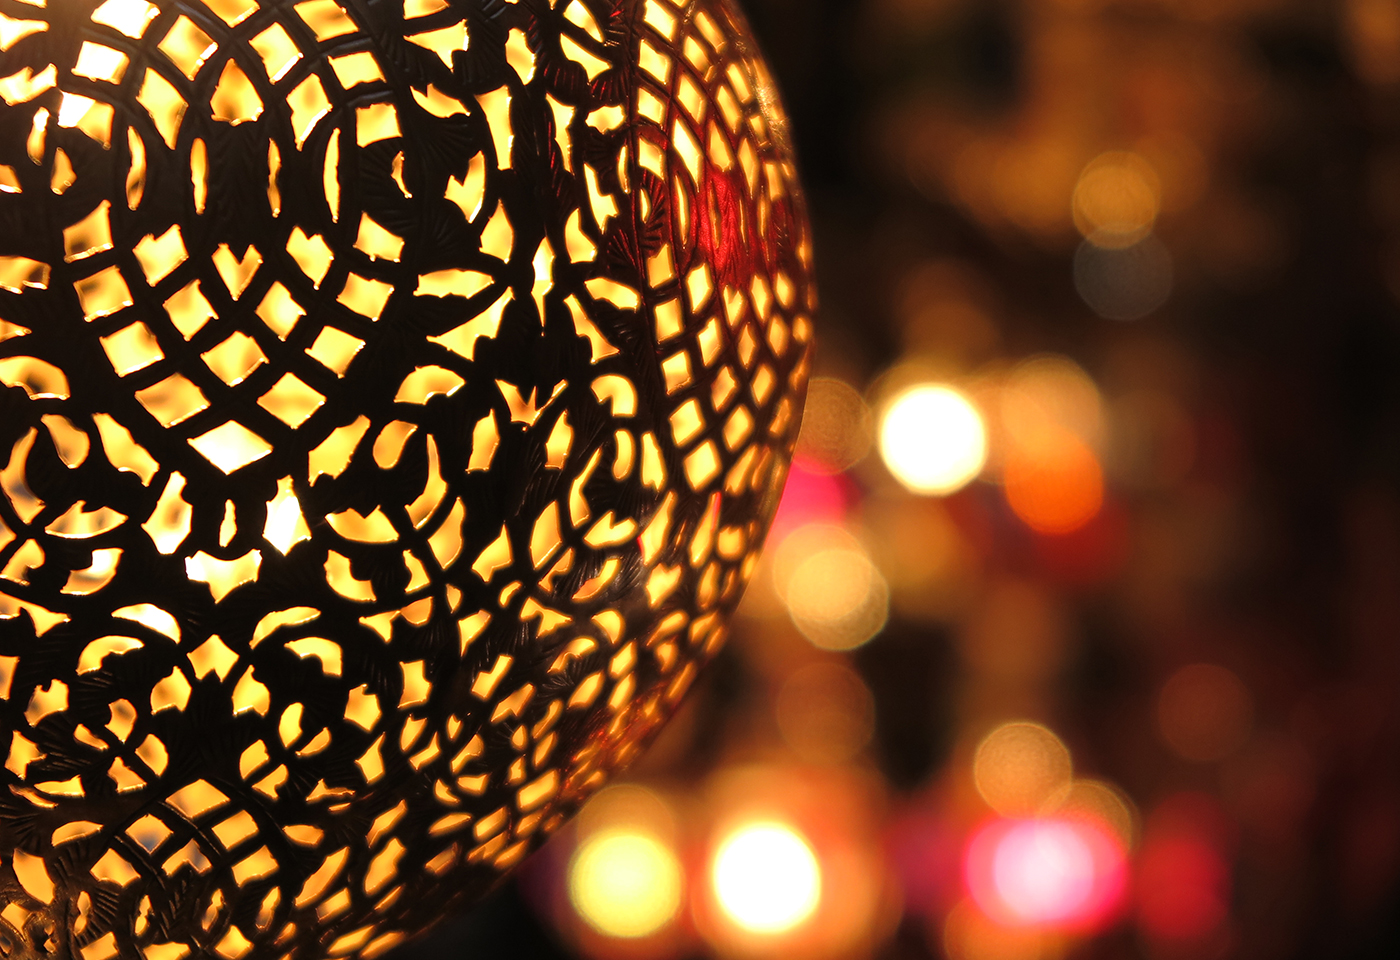 Decorative light, with background bokeh